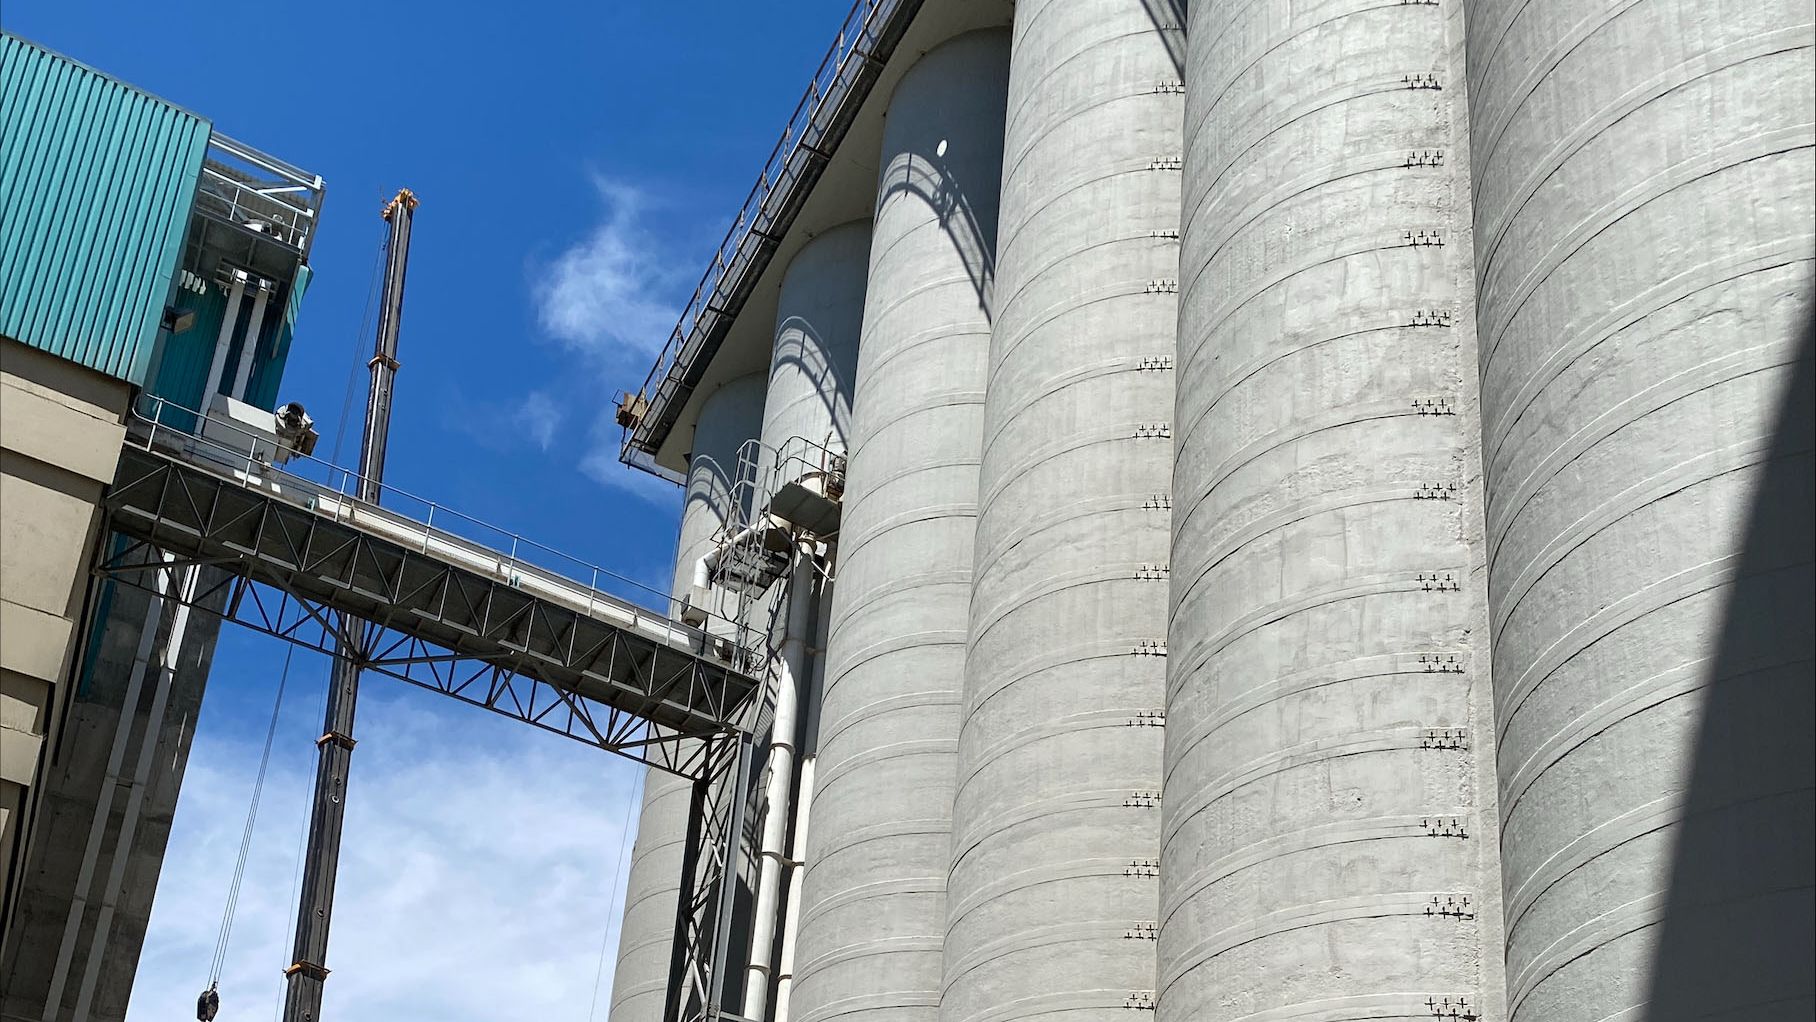 Concrete repair and protection chemicals for food industry specified for silos.